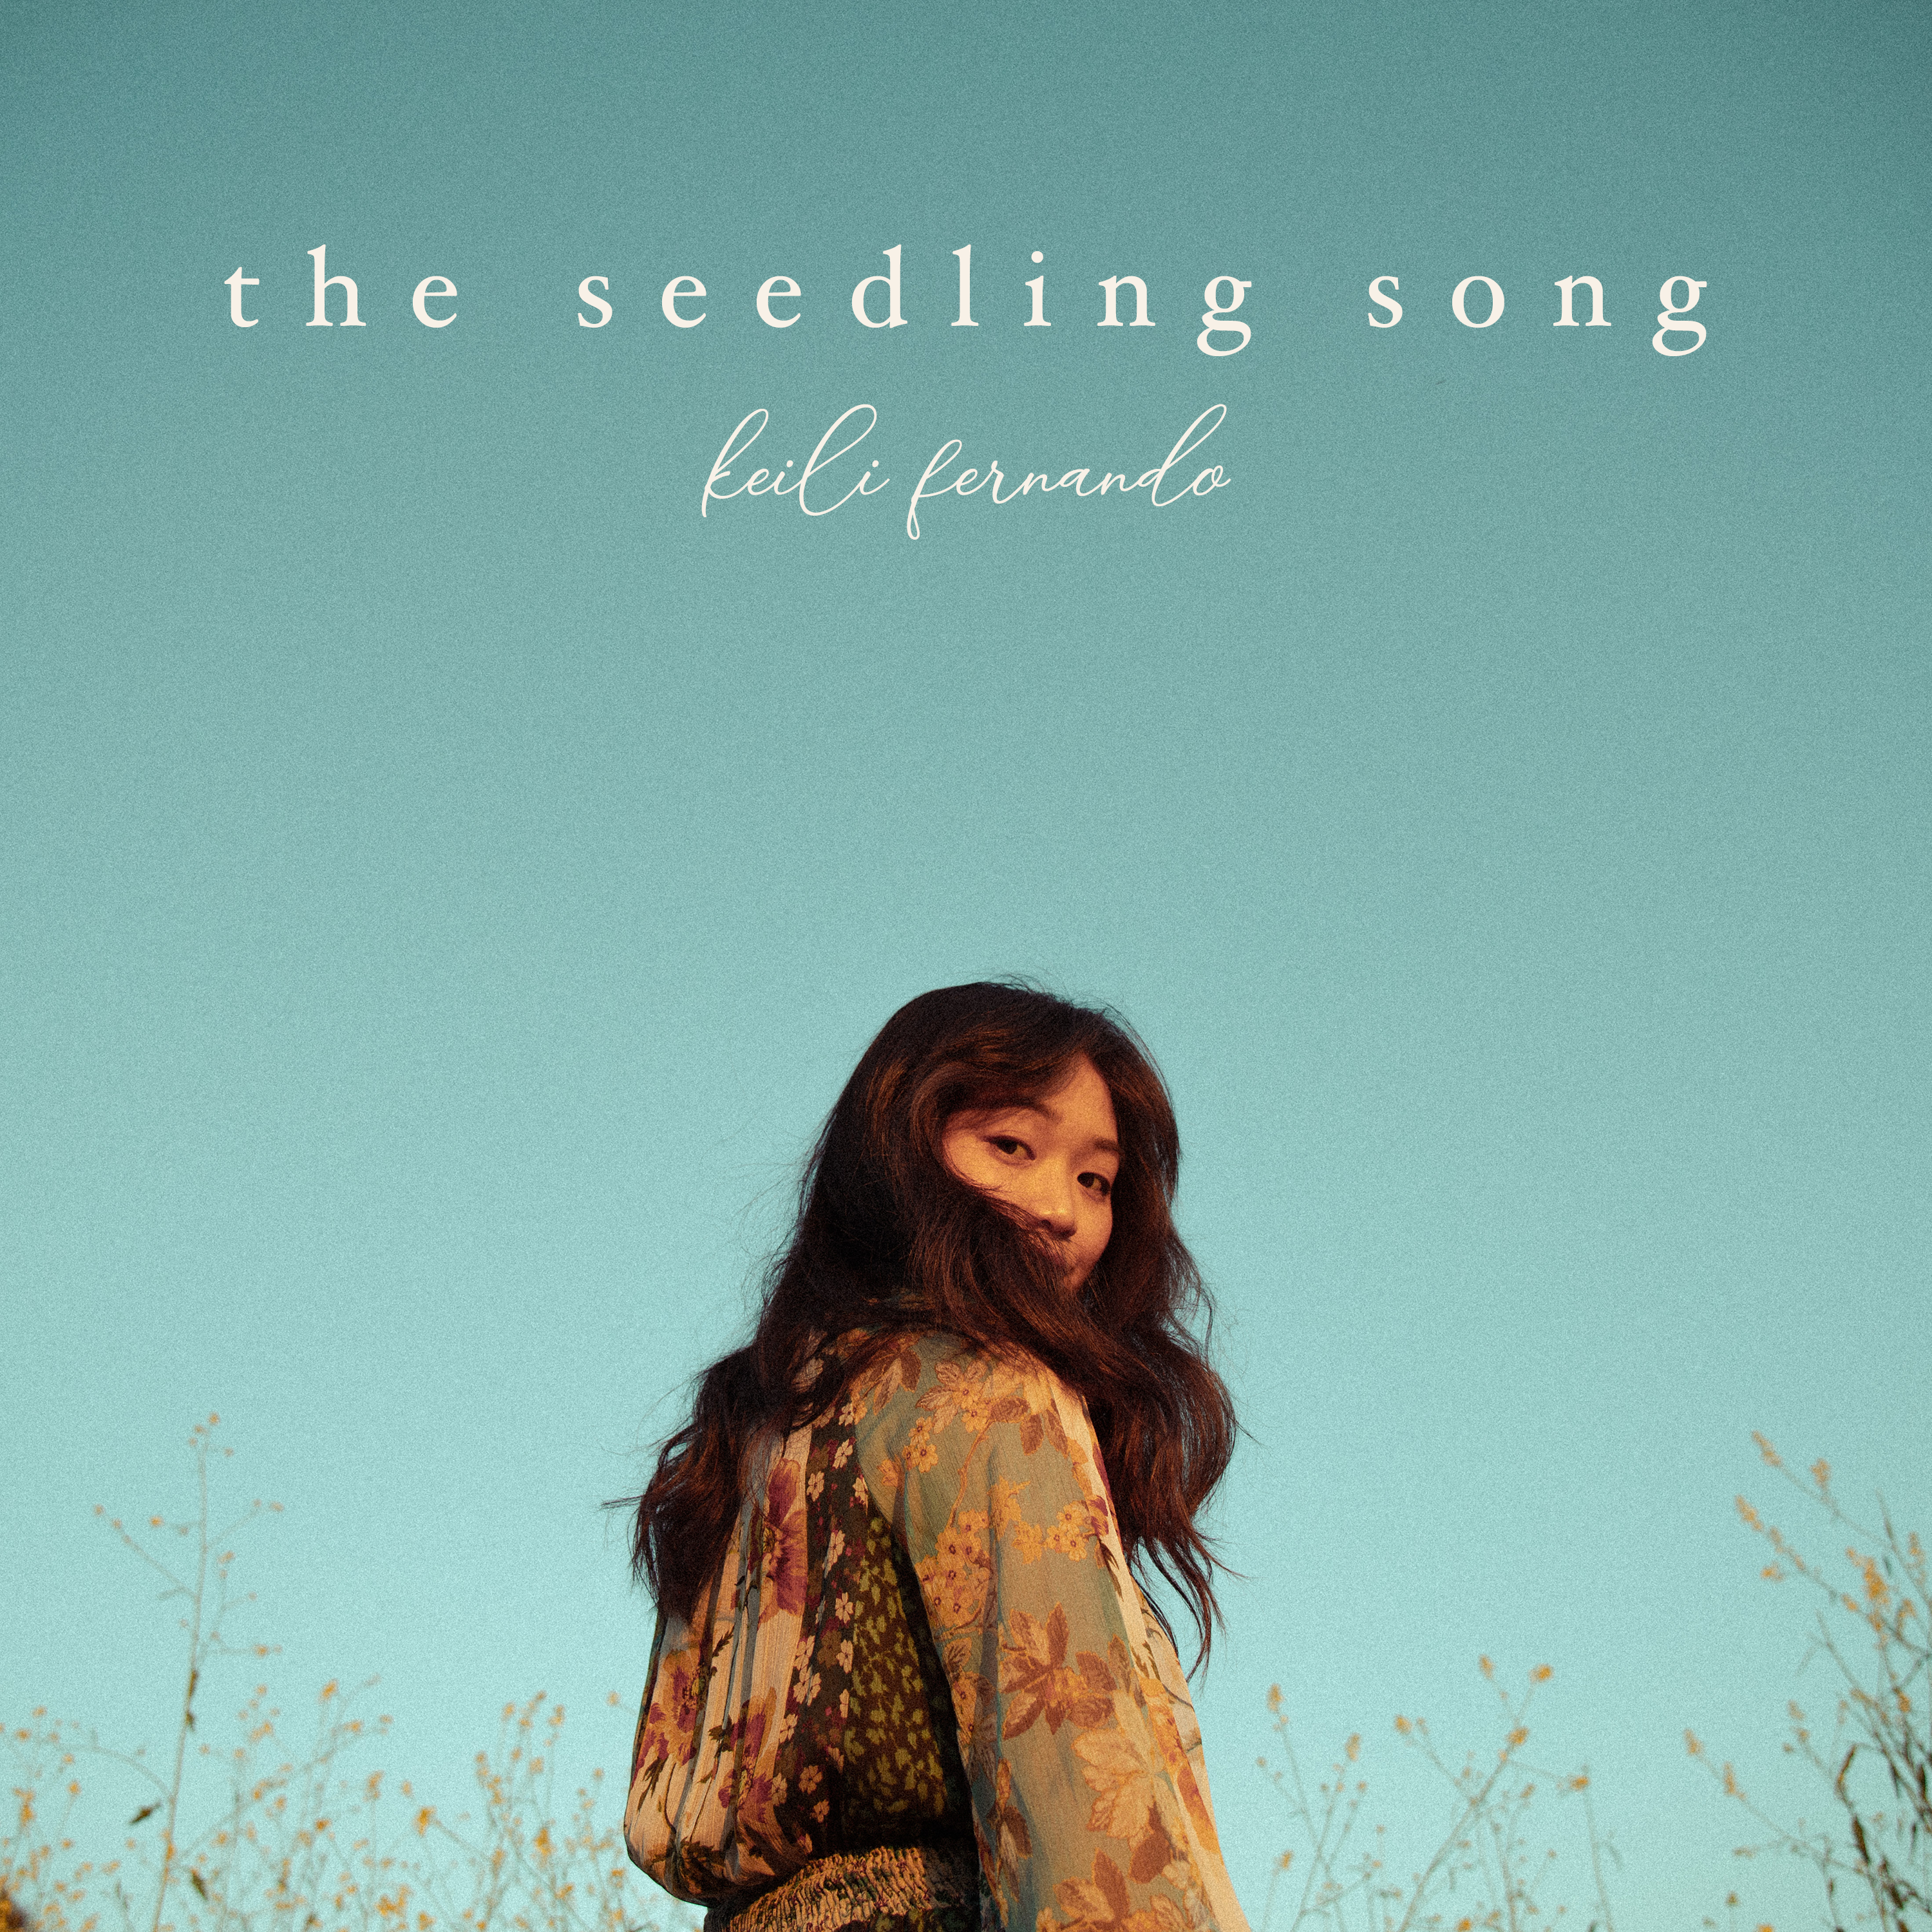 Indie-Folk Artist Keili Fernando Blossoms with “The Seedling Song,” a Melodic Tribute to Generations Past and Future